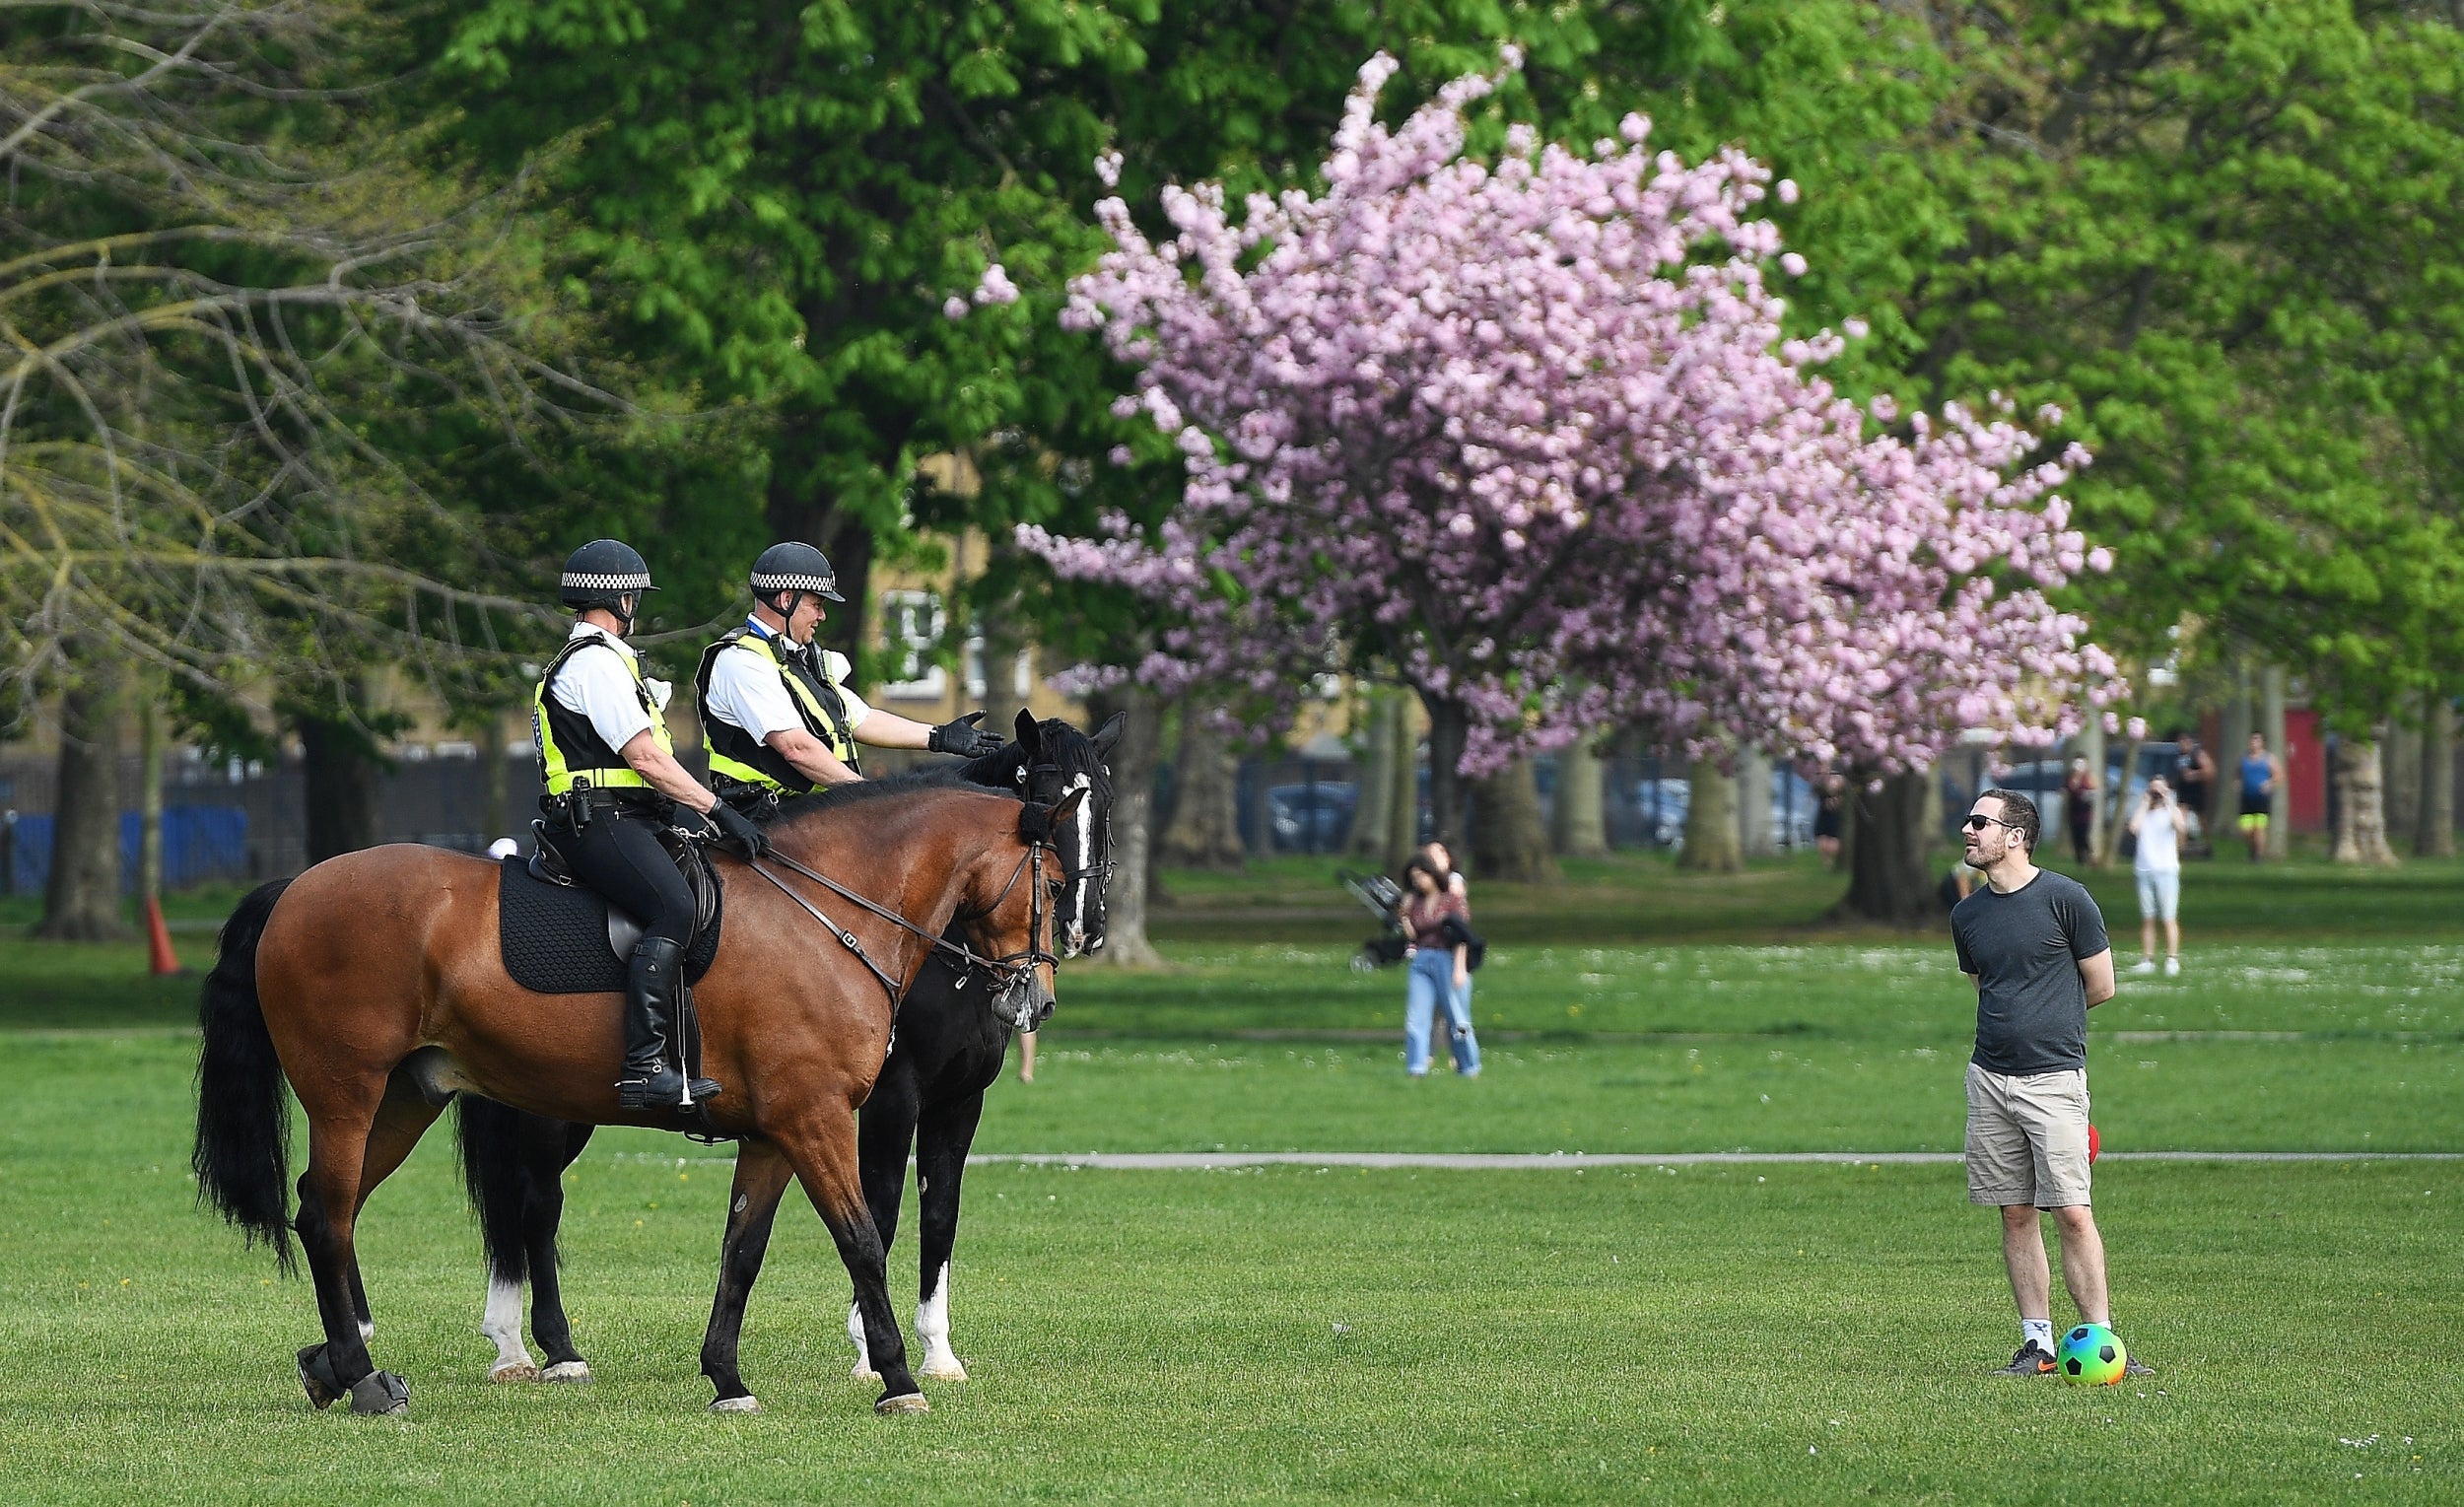 Police on horseback talk to a man in Victoria Park in London, Britain